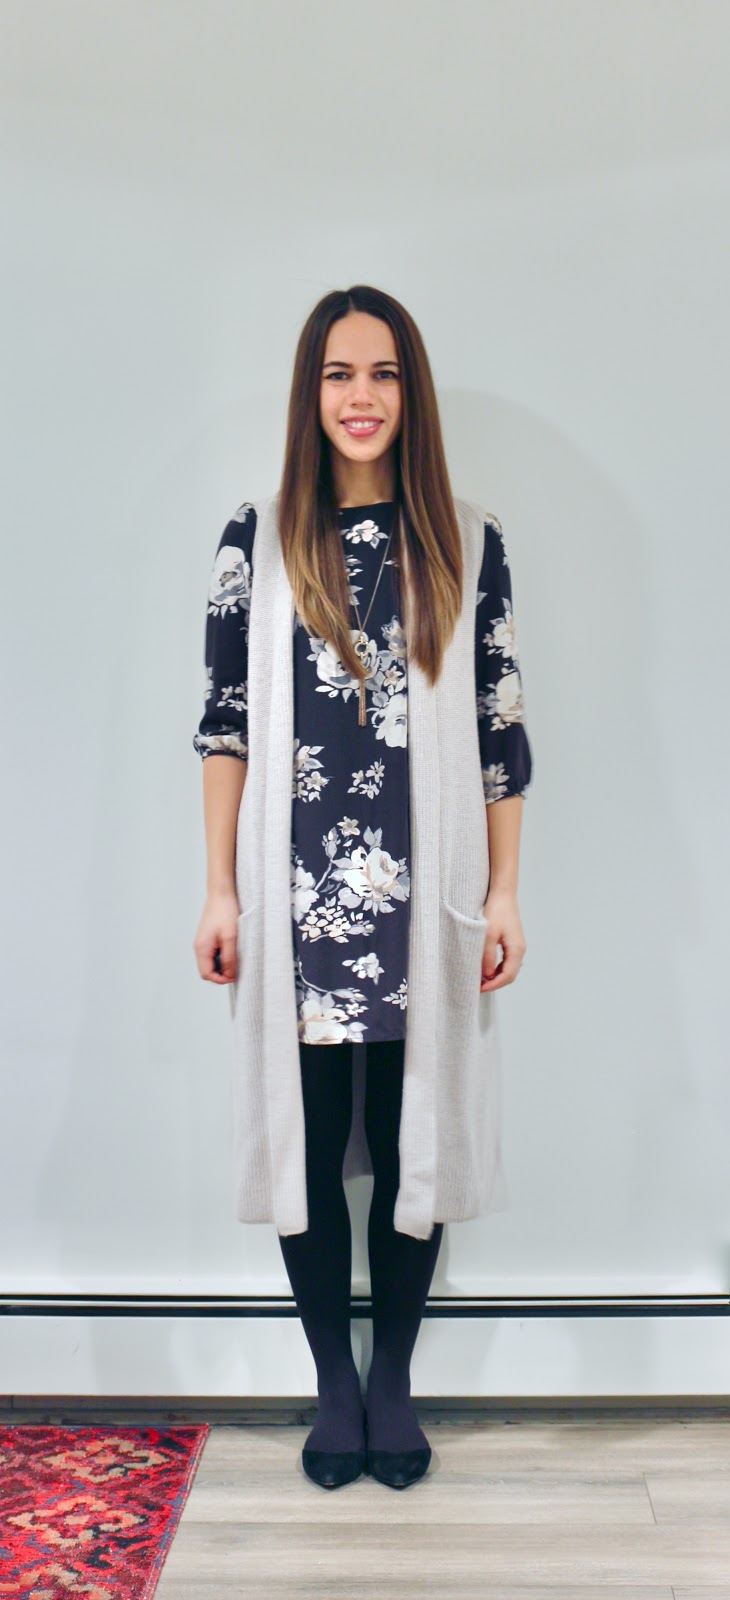 Jules in Flats - Floral Shift Dress with Knit Duster Sweater Vest (Business Casual Winter Workwear on a Budget)